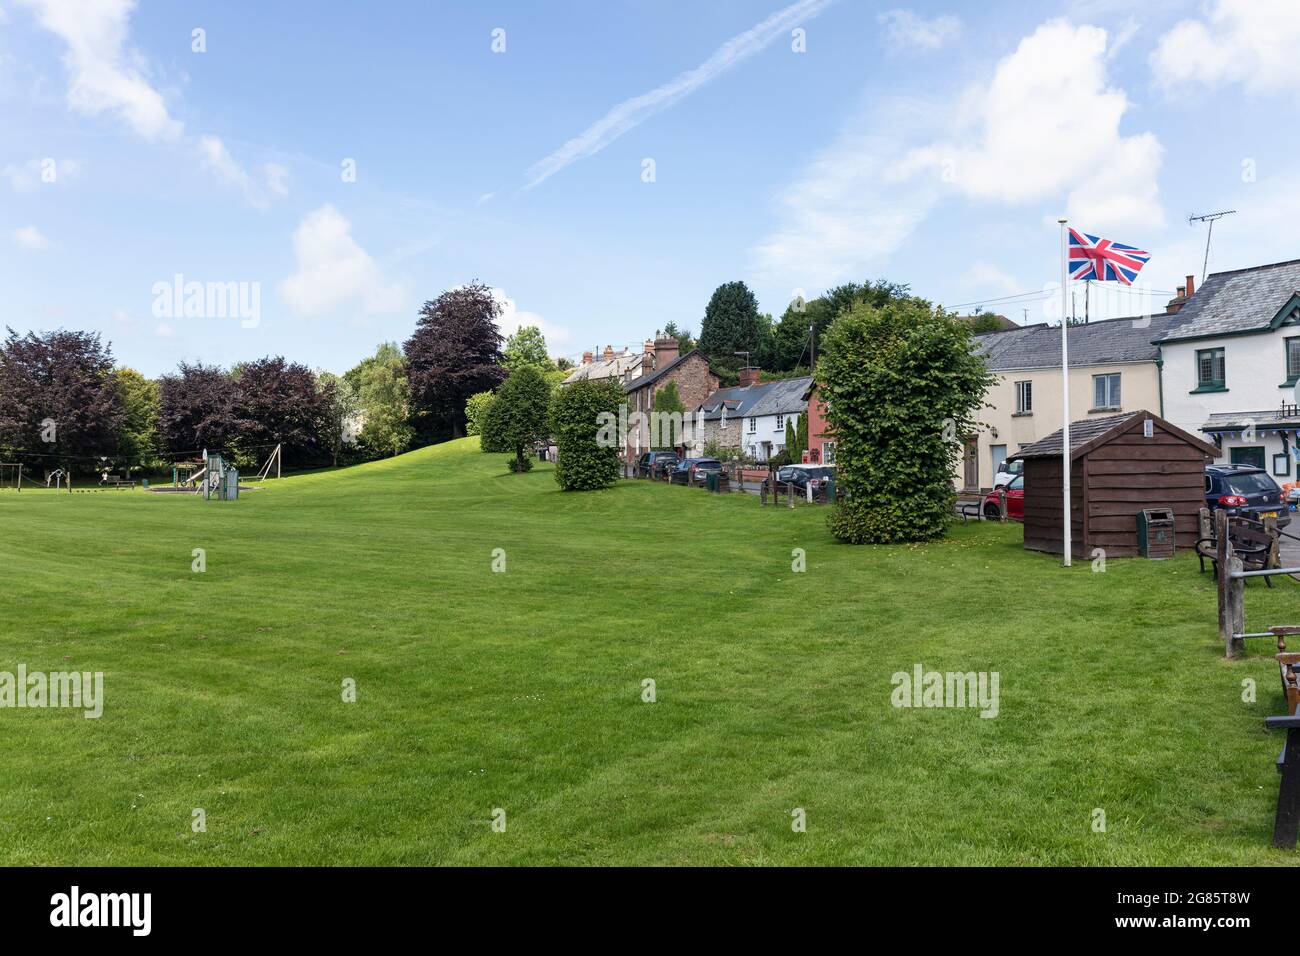 Exford village green with a Union Jack flag flying, Exmoor National Park, Somerset, England, UK Stock Photo